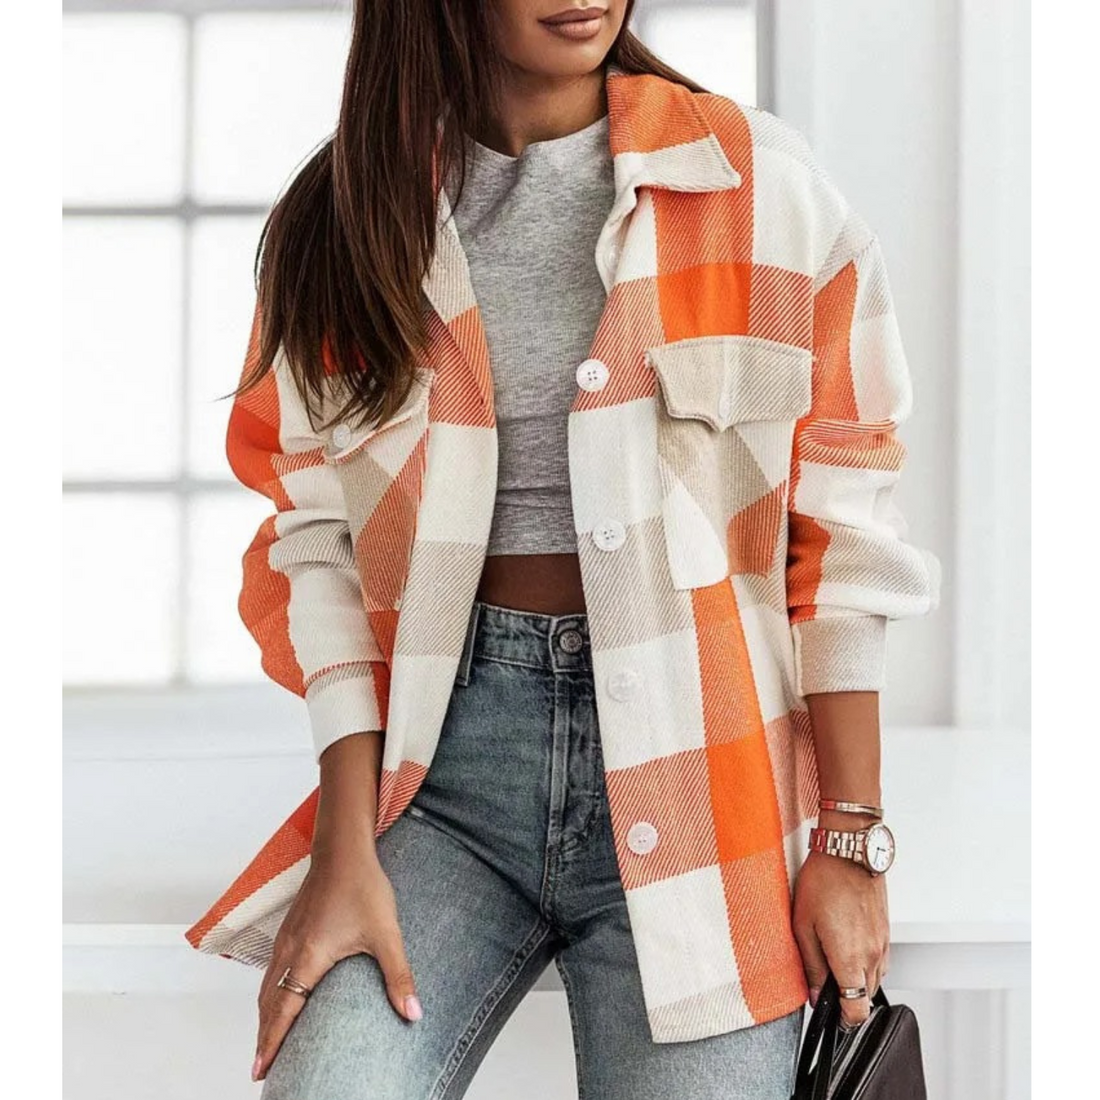 Cathy - Comfortable Jacket with Plaid print